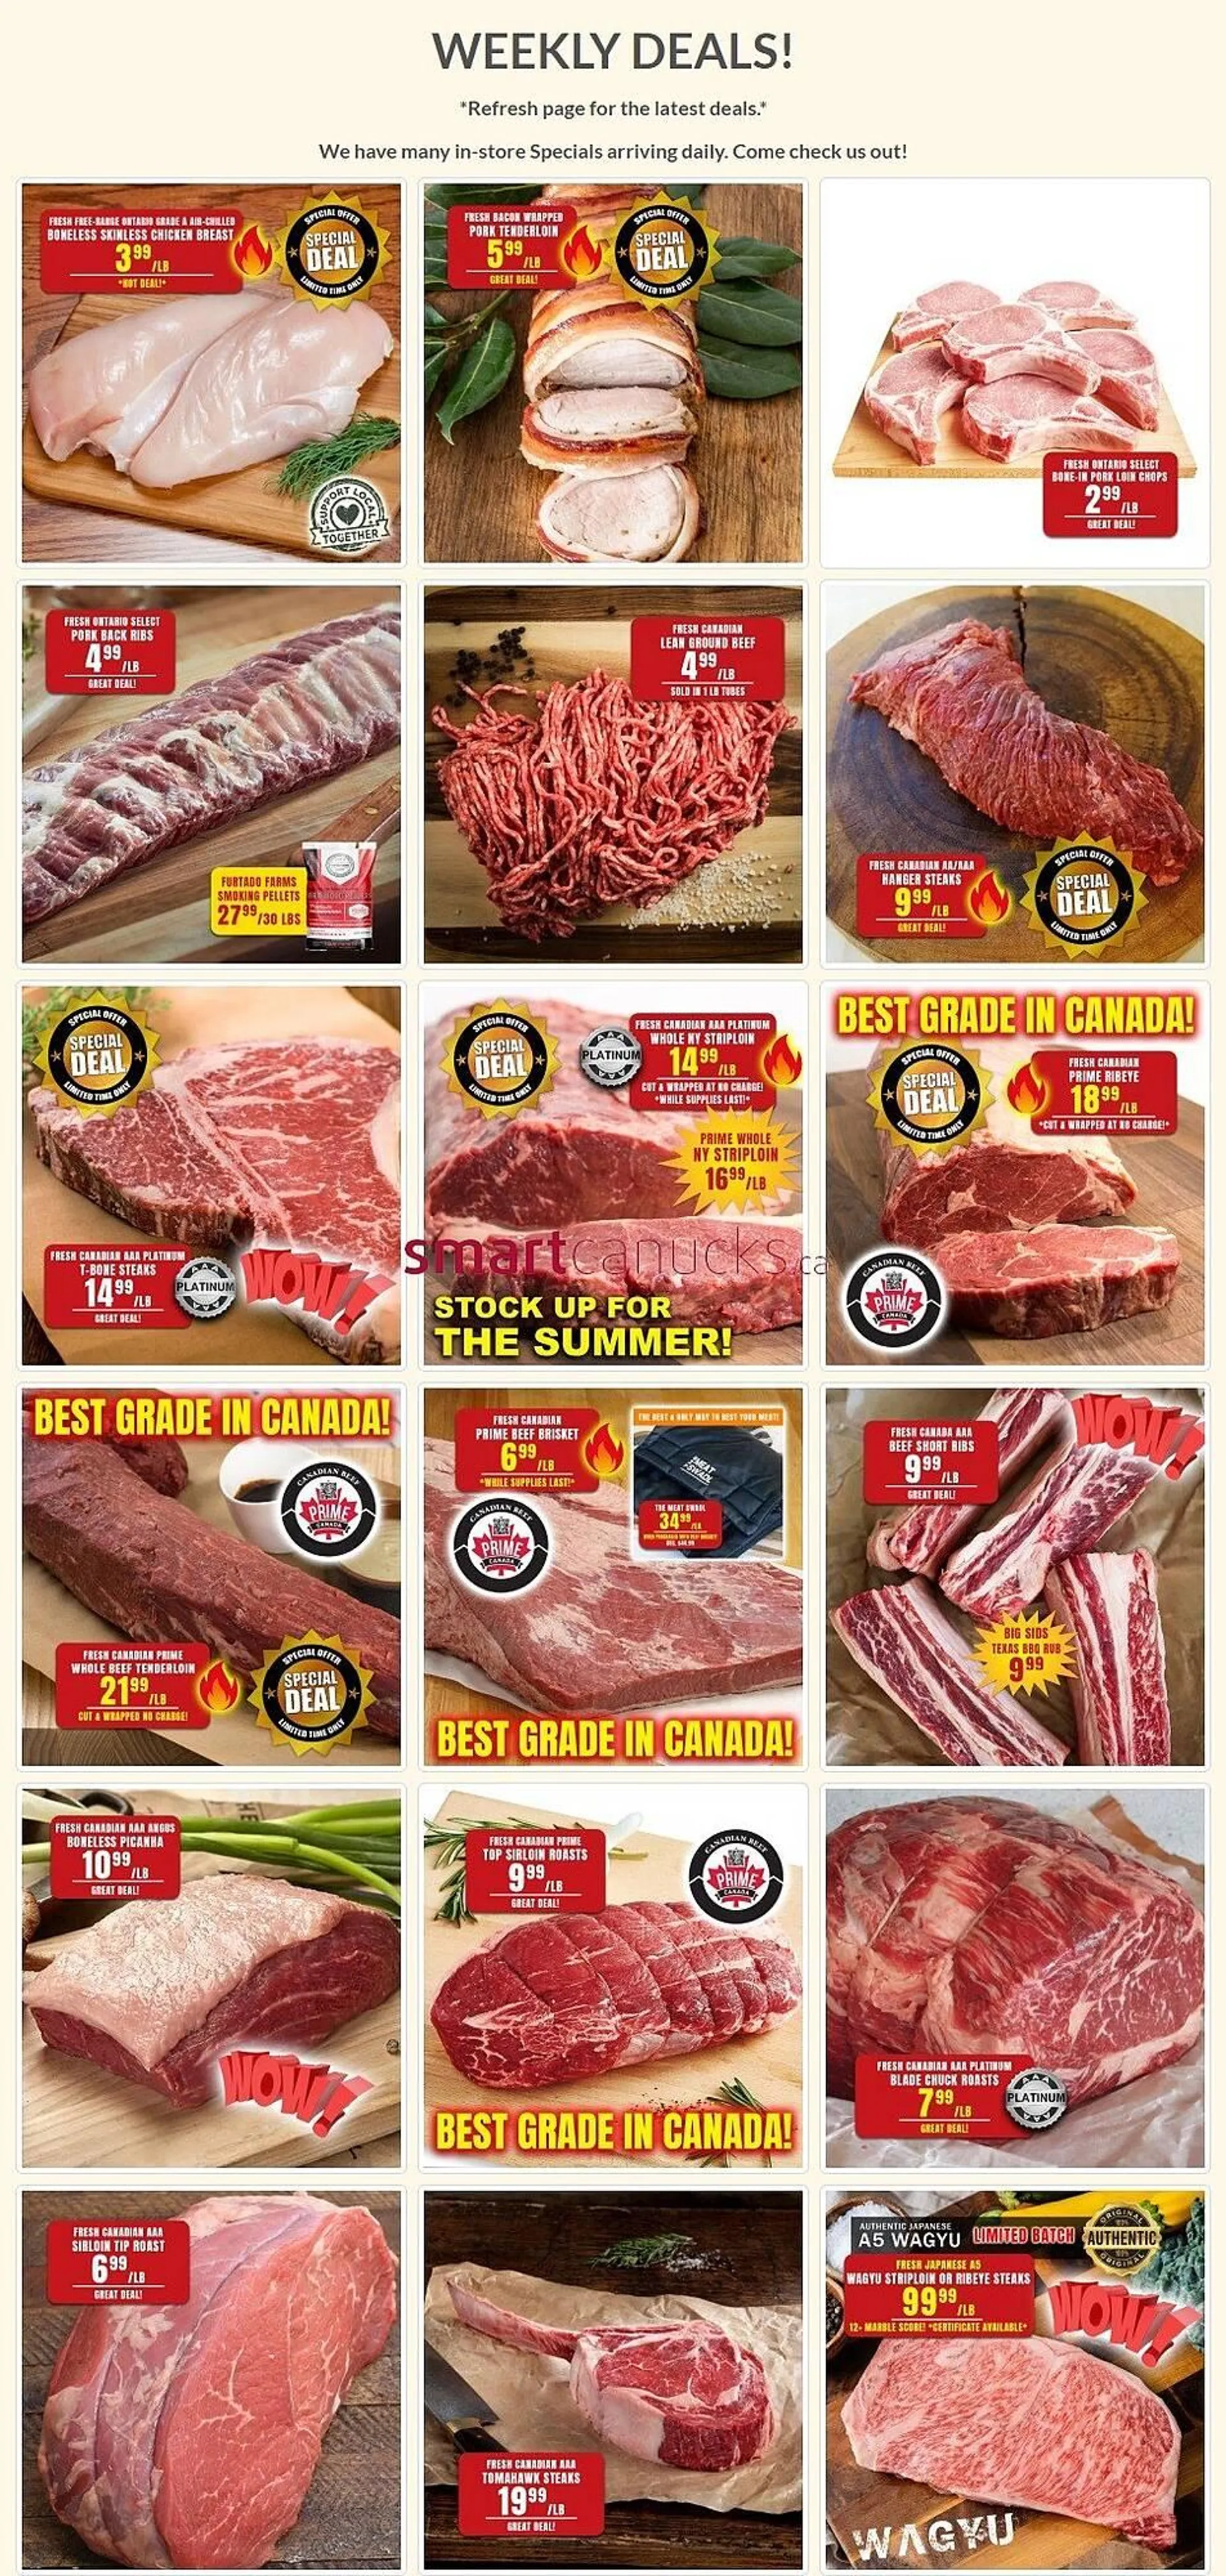 Roberts Fresh and Boxed Meats flyer - 1